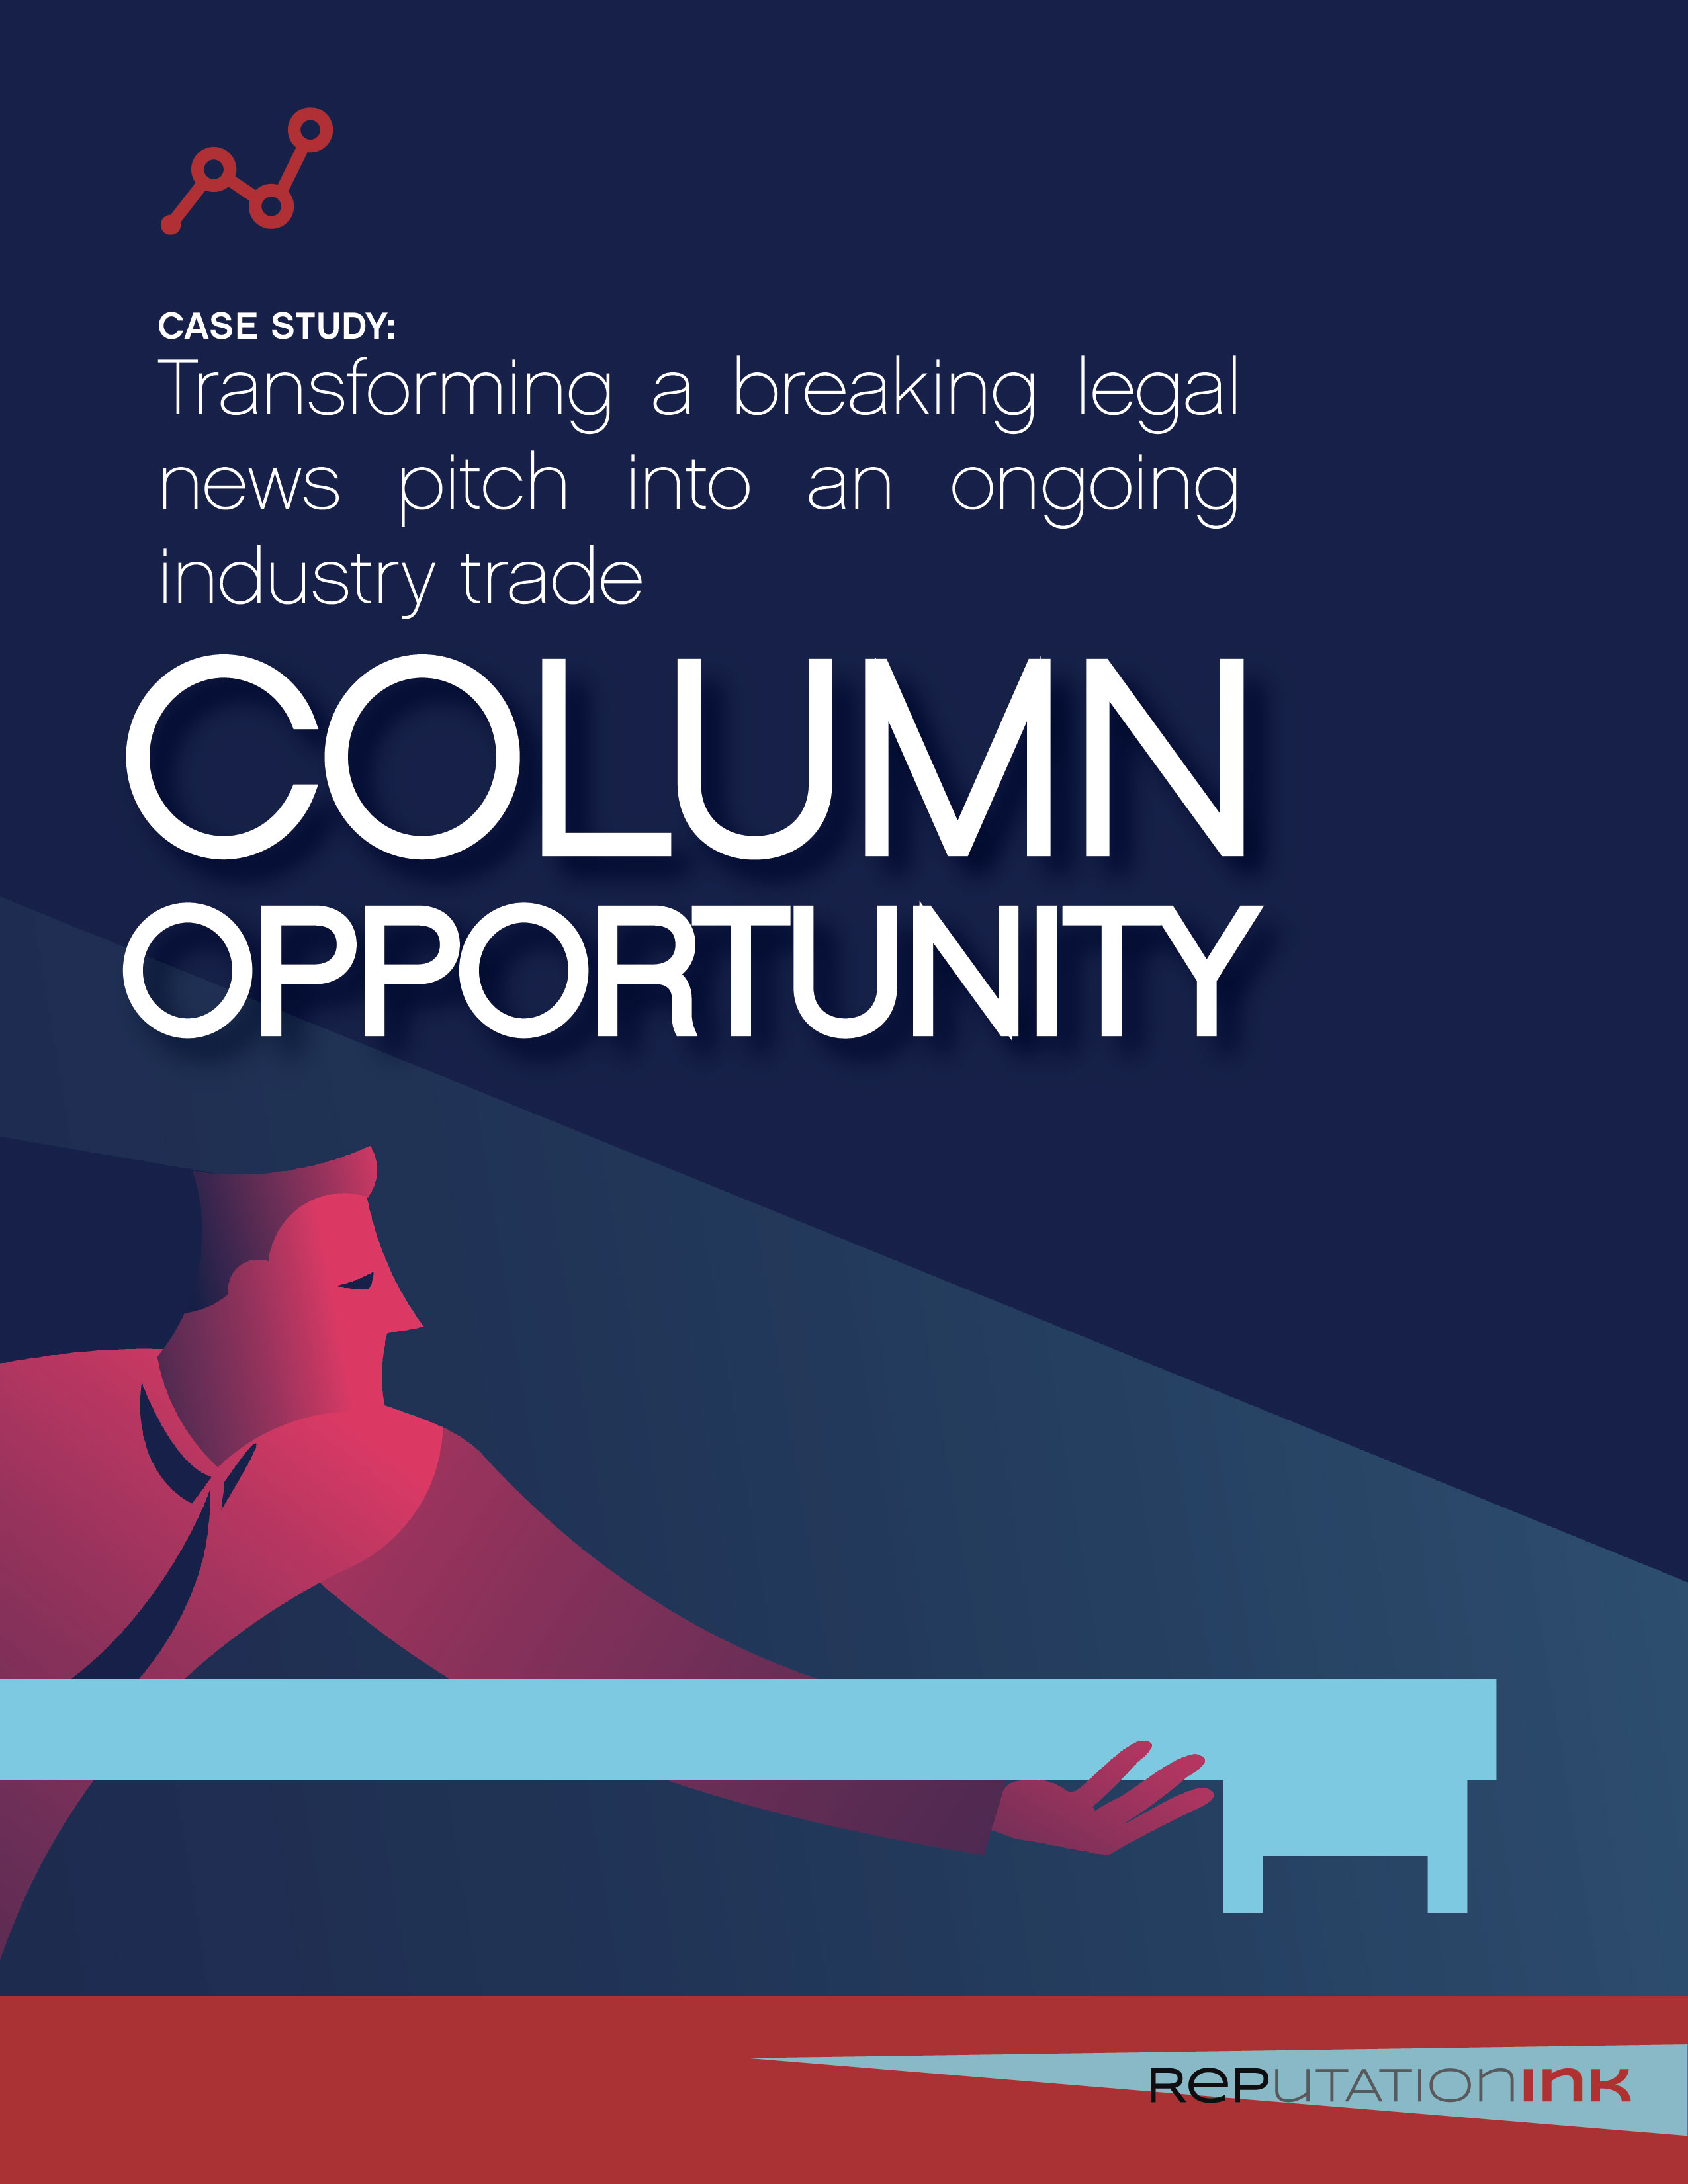 Transforming a breaking legal news pitch into an ongoing industry trade column opportunity